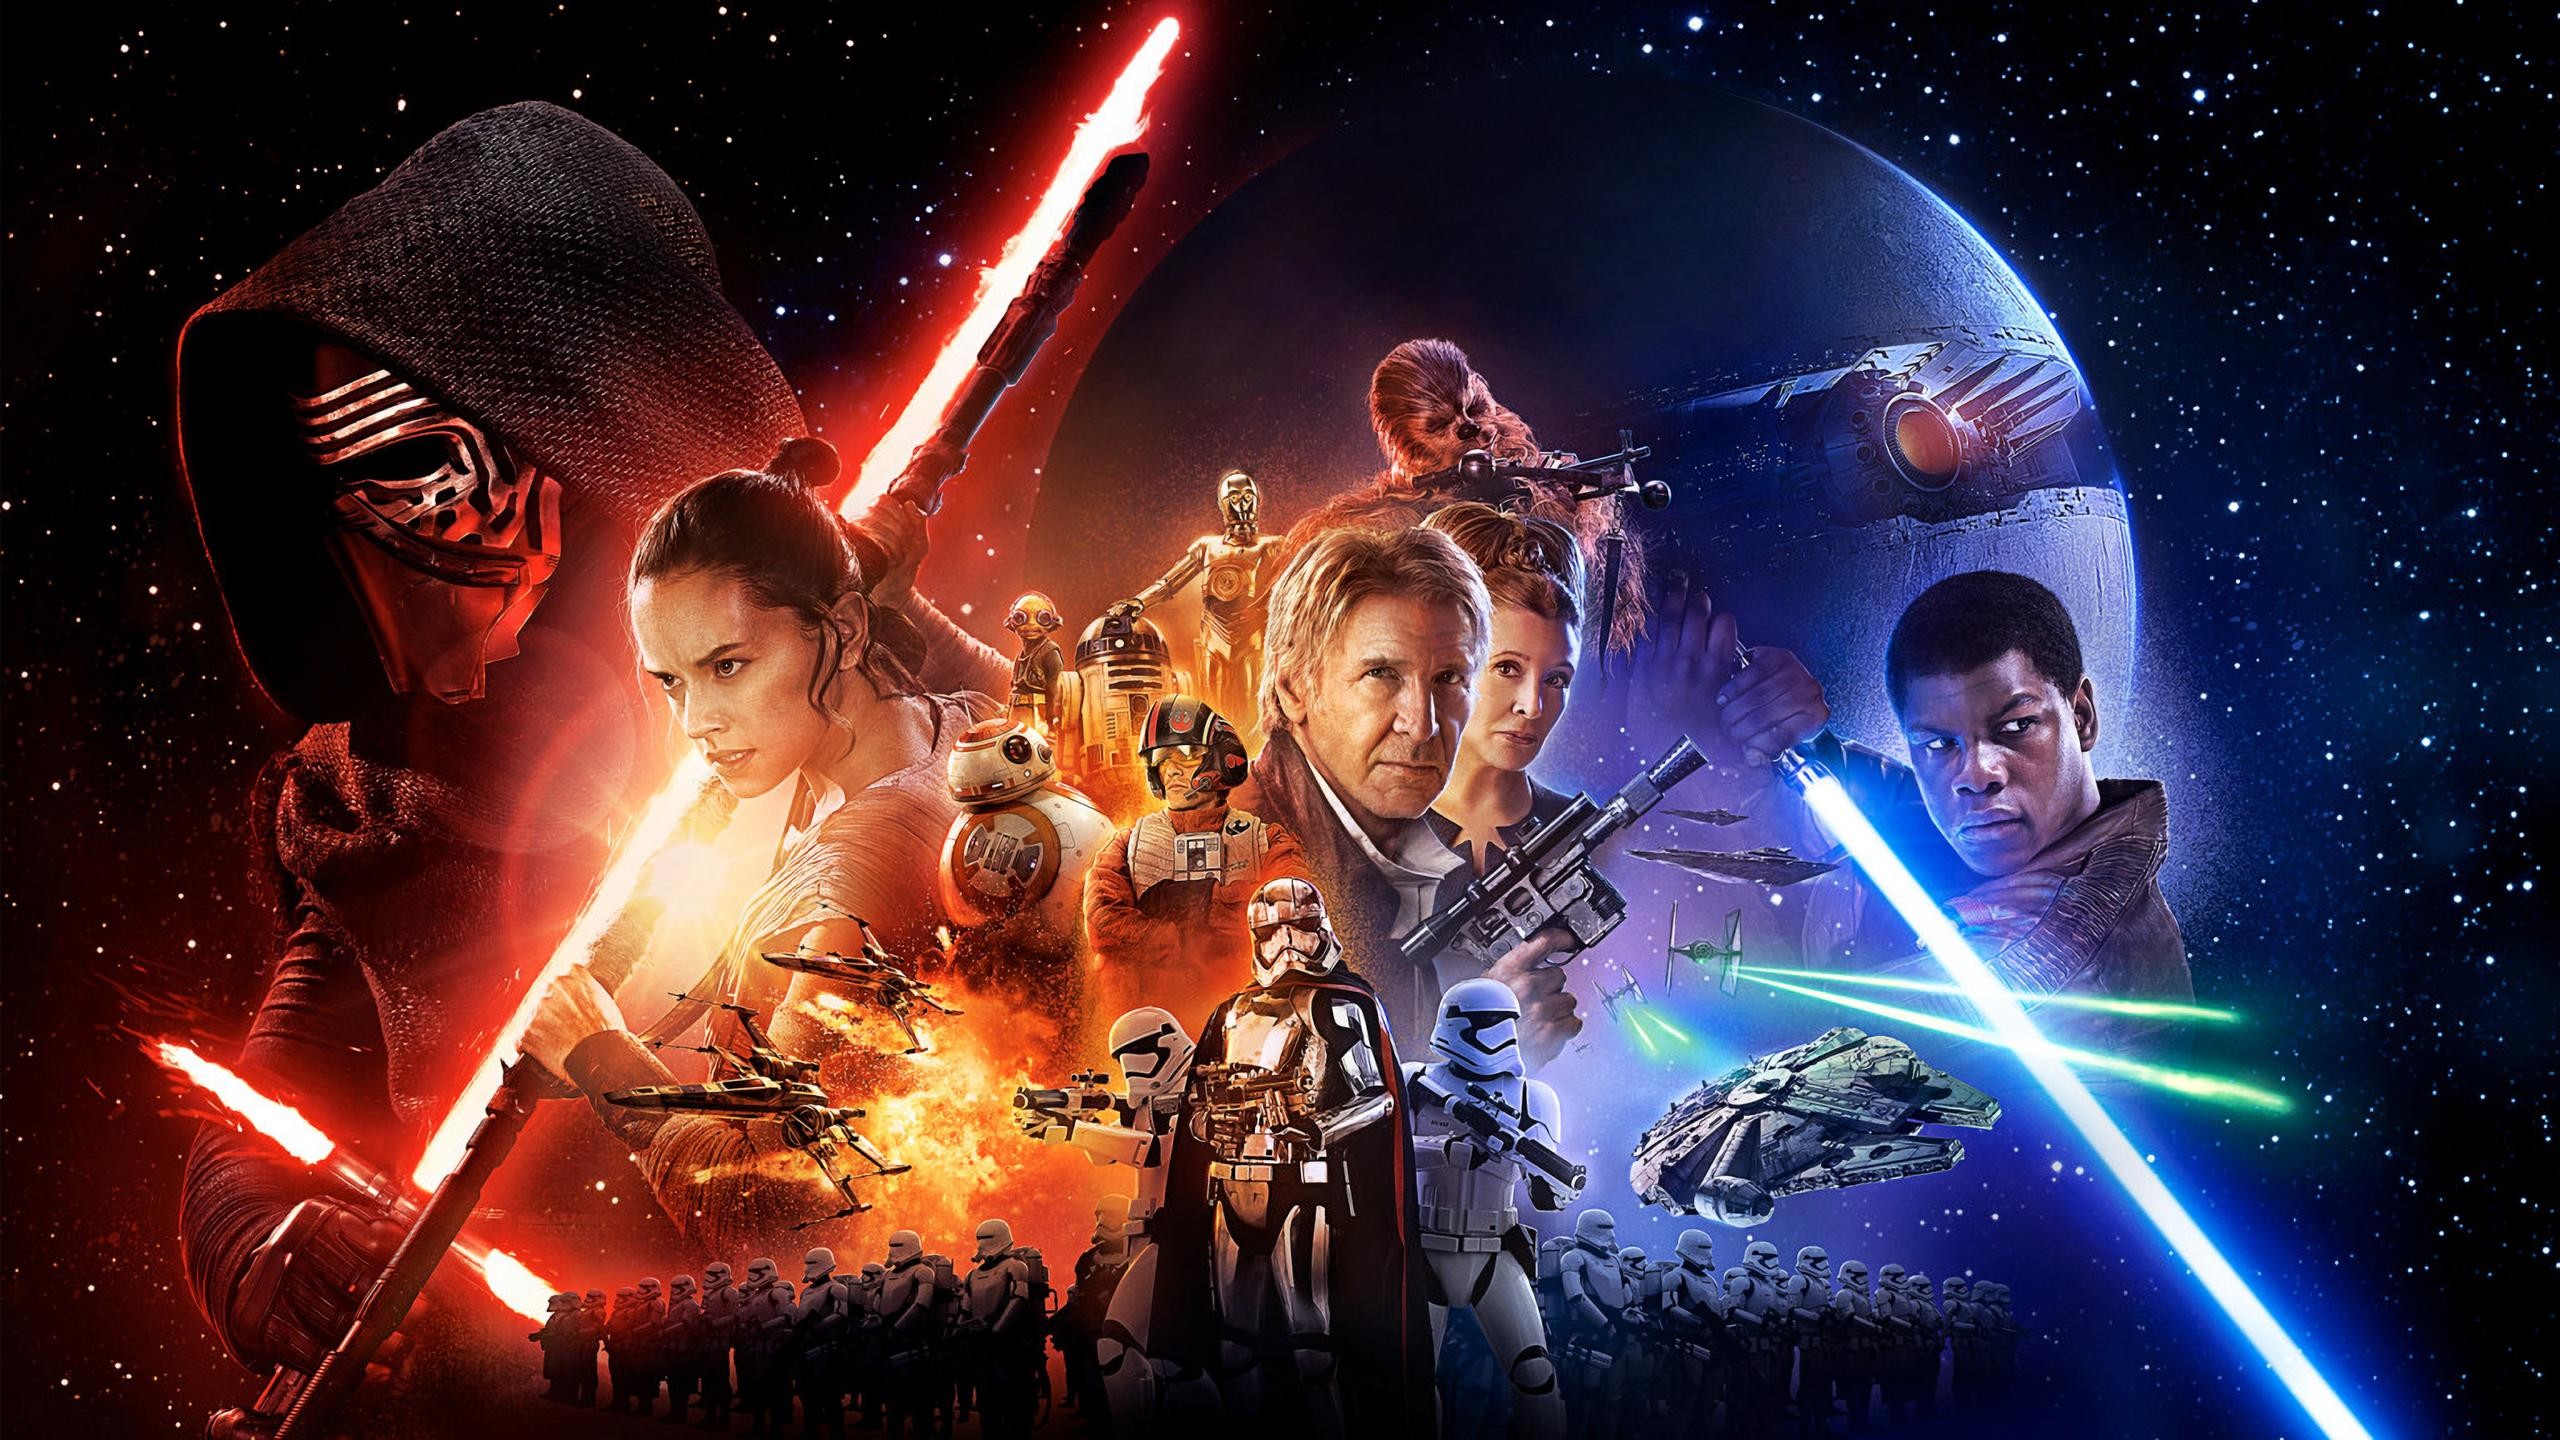 193 Star Wars Episode VII The Force Awakens HD Wallpapers Backgrounds – Wallpaper Abyss